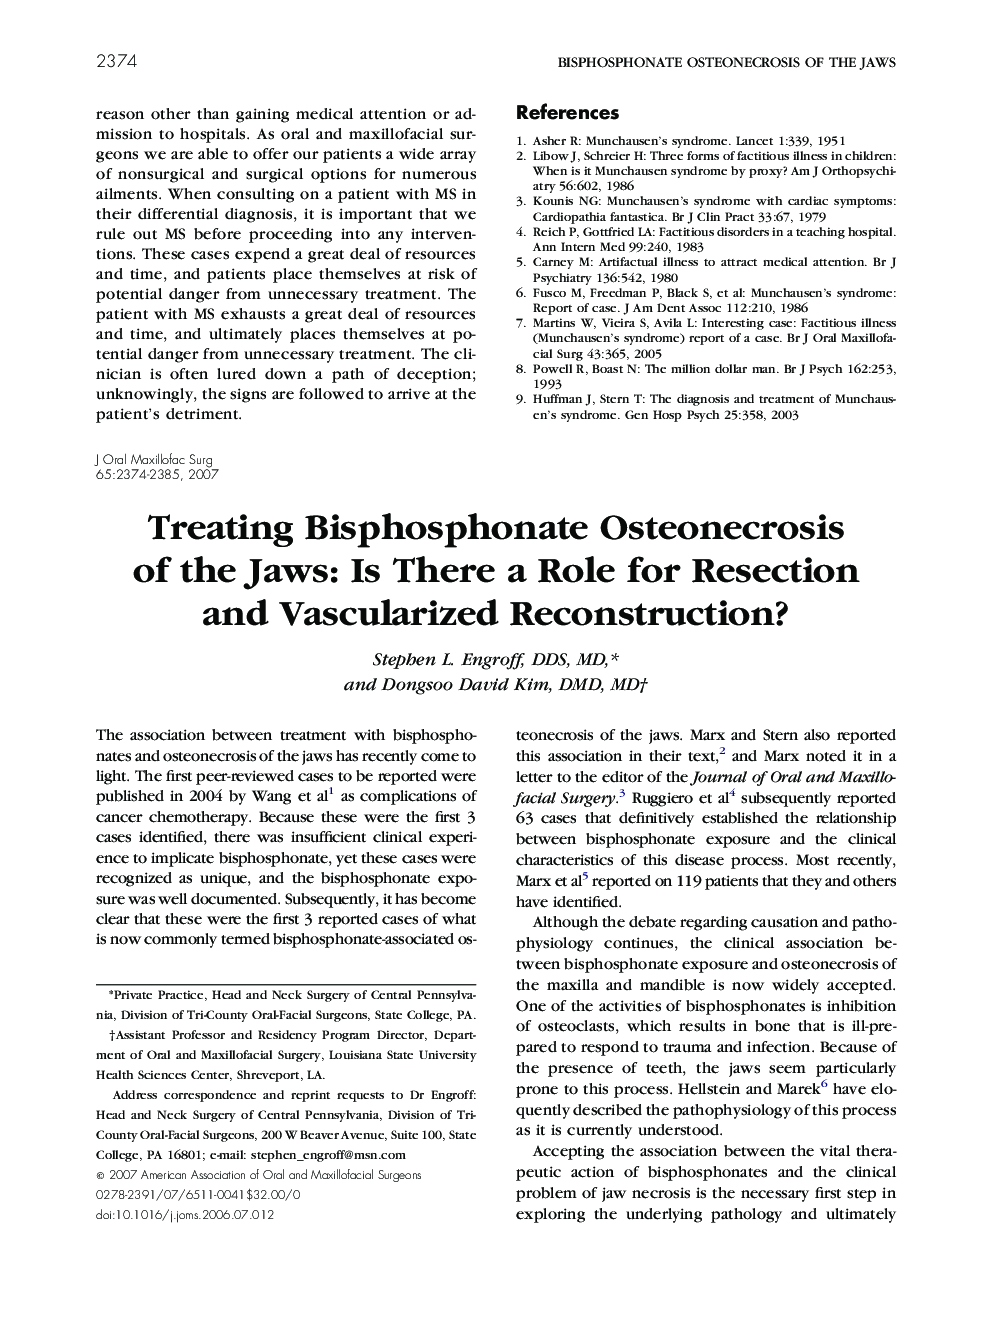 Treating Bisphosphonate Osteonecrosis of the Jaws: Is There a Role for Resection and Vascularized Reconstruction?